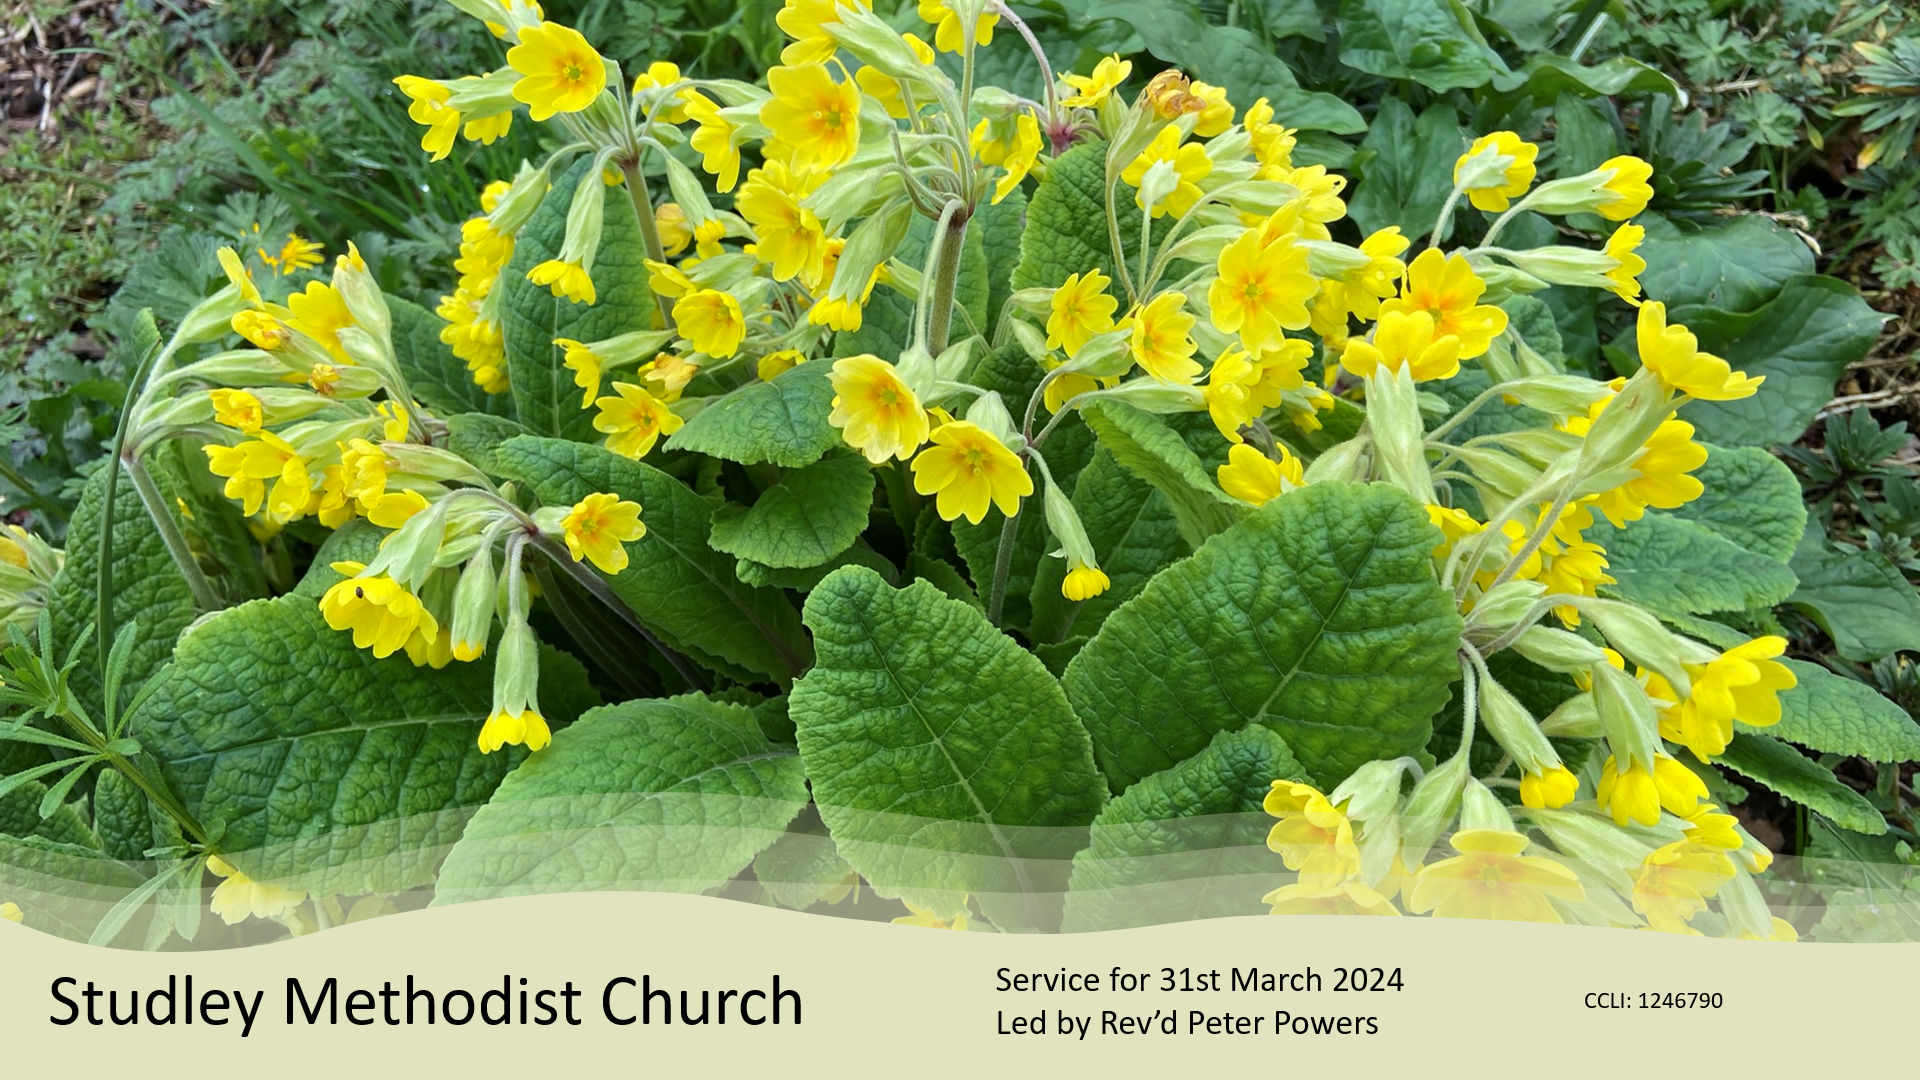 Service for Easter Sunday 31st March 2024